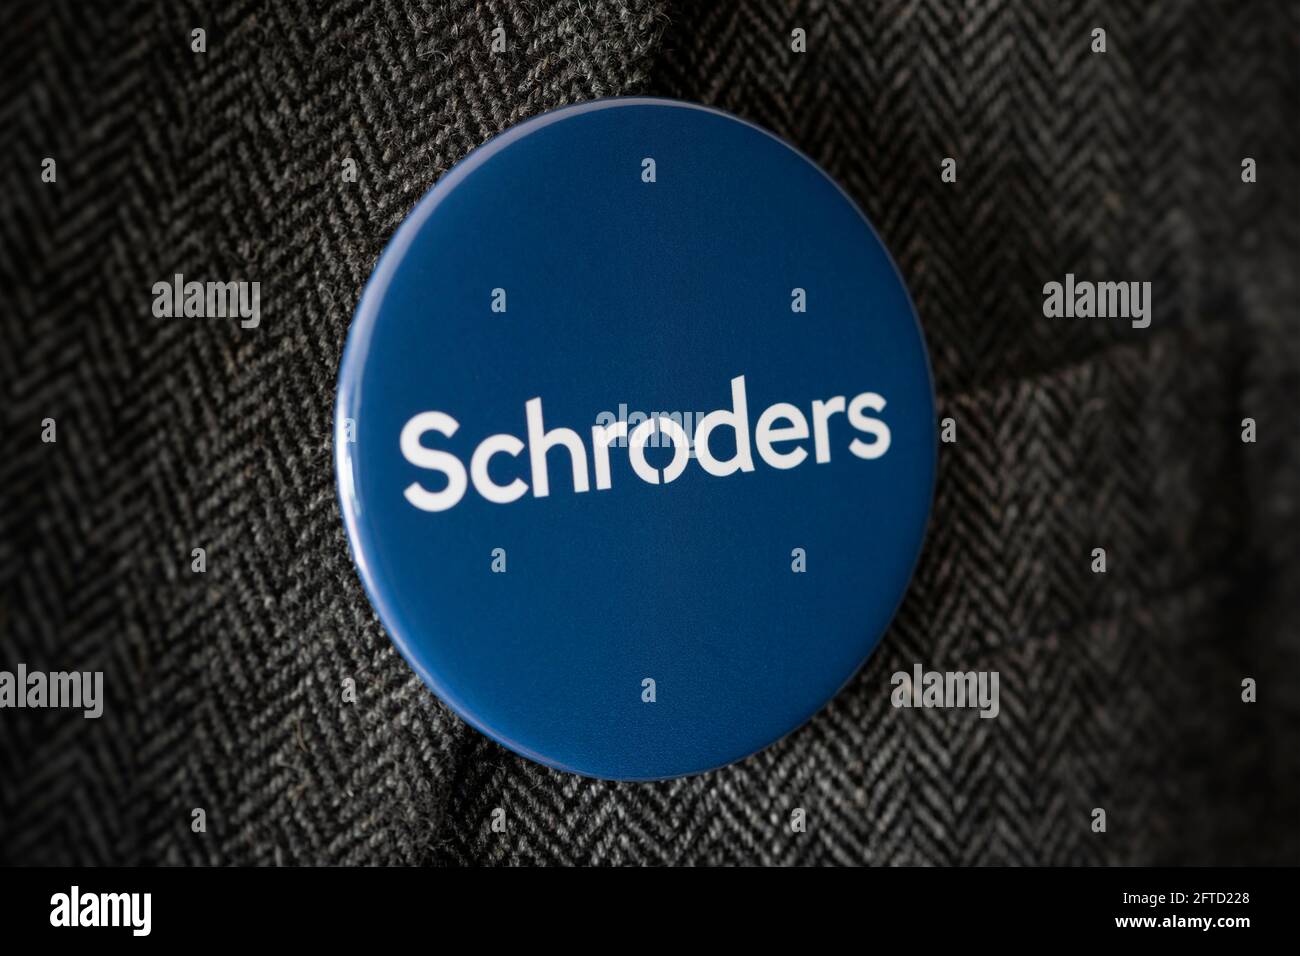 A button badge bearing the logo of Schroders Bank fastened to a suit jacket. Stock Photo